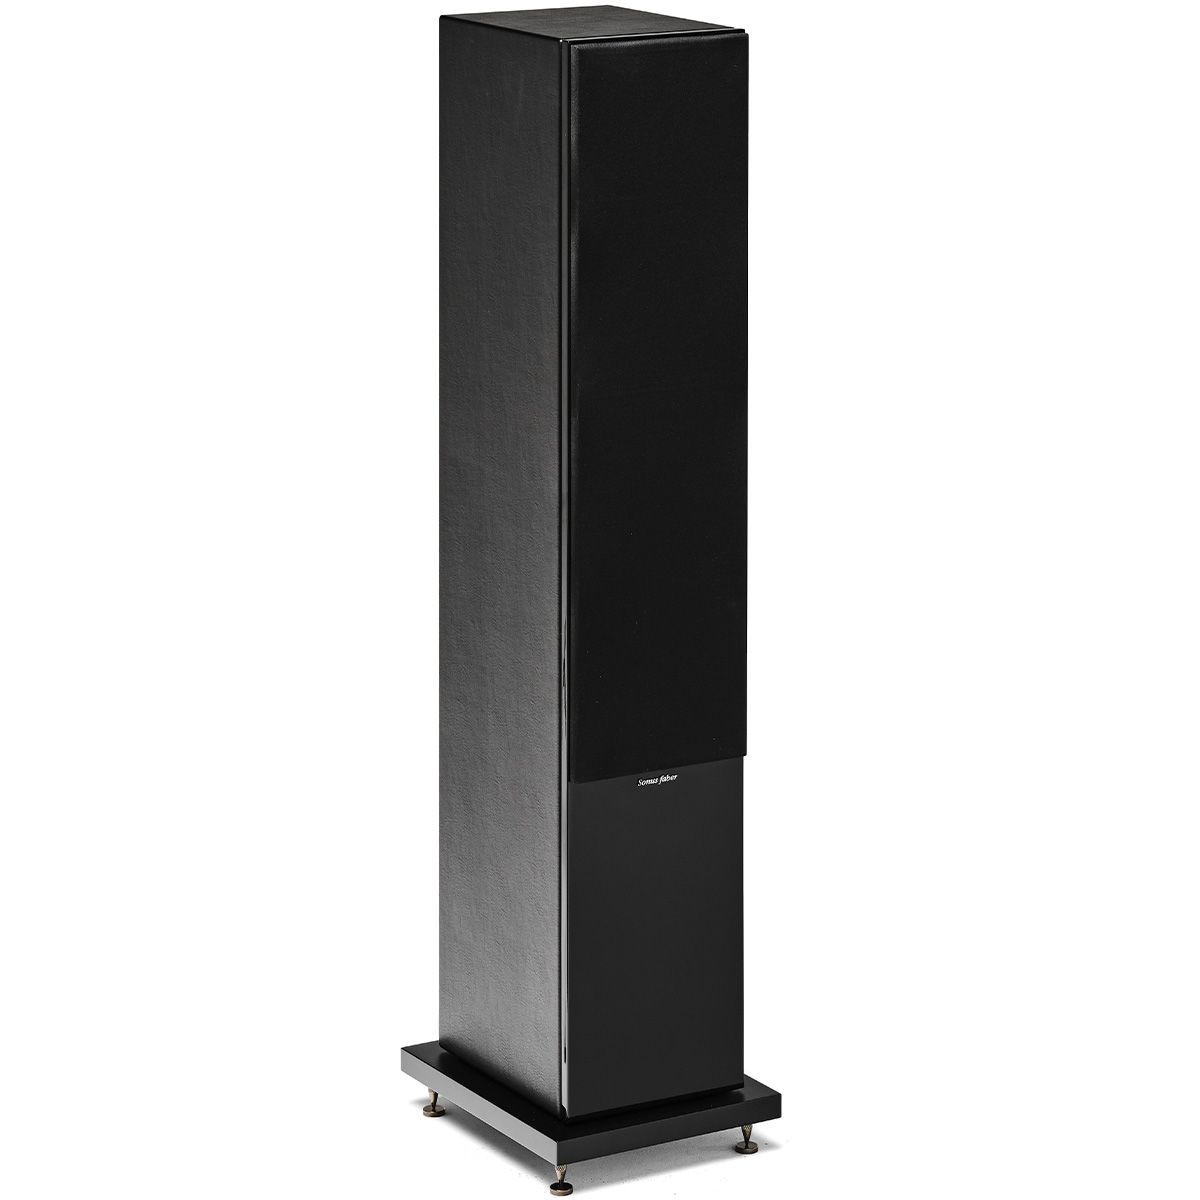 Sonus Faber Lumina III Floorstanding Speaker - Black - Each - angled front view with grille